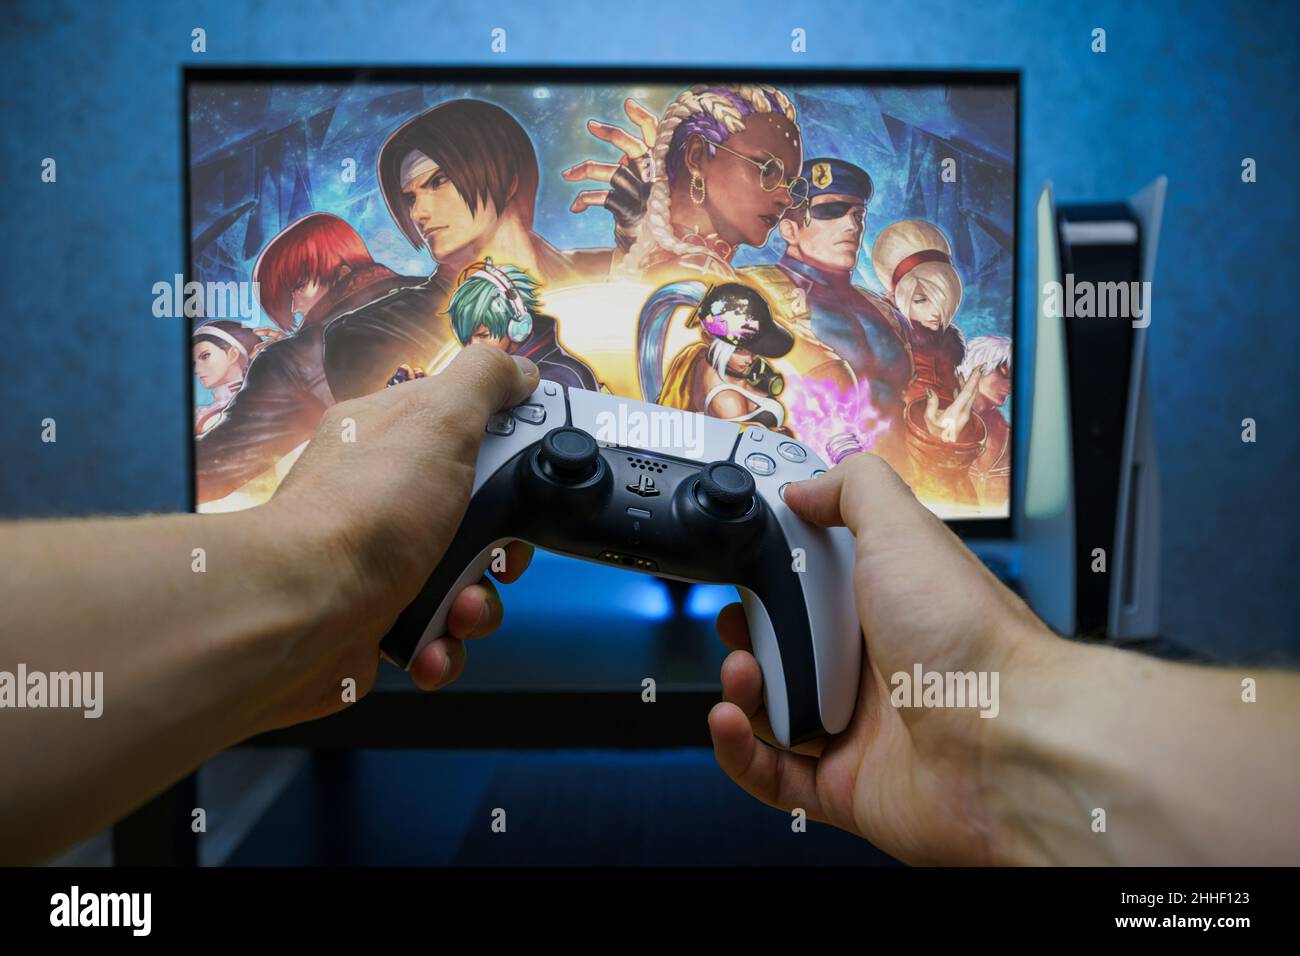 THE KING OF FIGHTERS XV video game. Point of view angle of playing video game with Playstation 5 console. Stock Photo